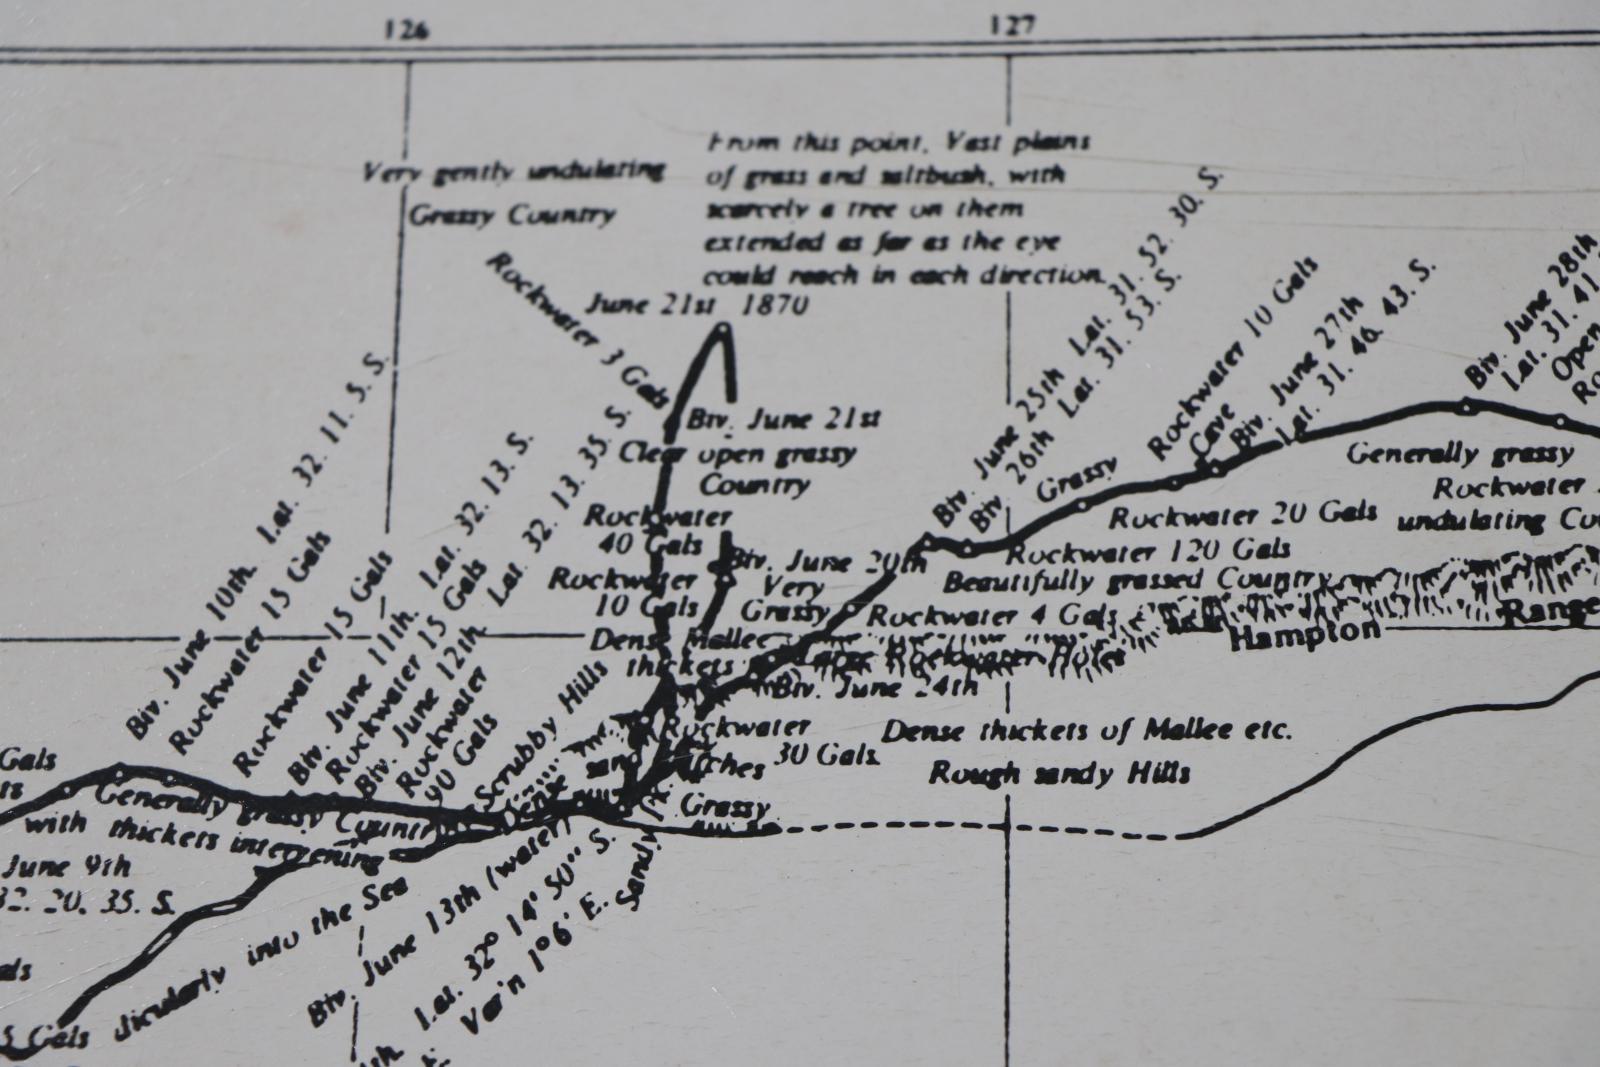 Closeup of map depicting the central portion of John Forrest's journey from Perth to Adelaide. Black ink on white background. Comments on terrain and coordinates make up most of mapping information.